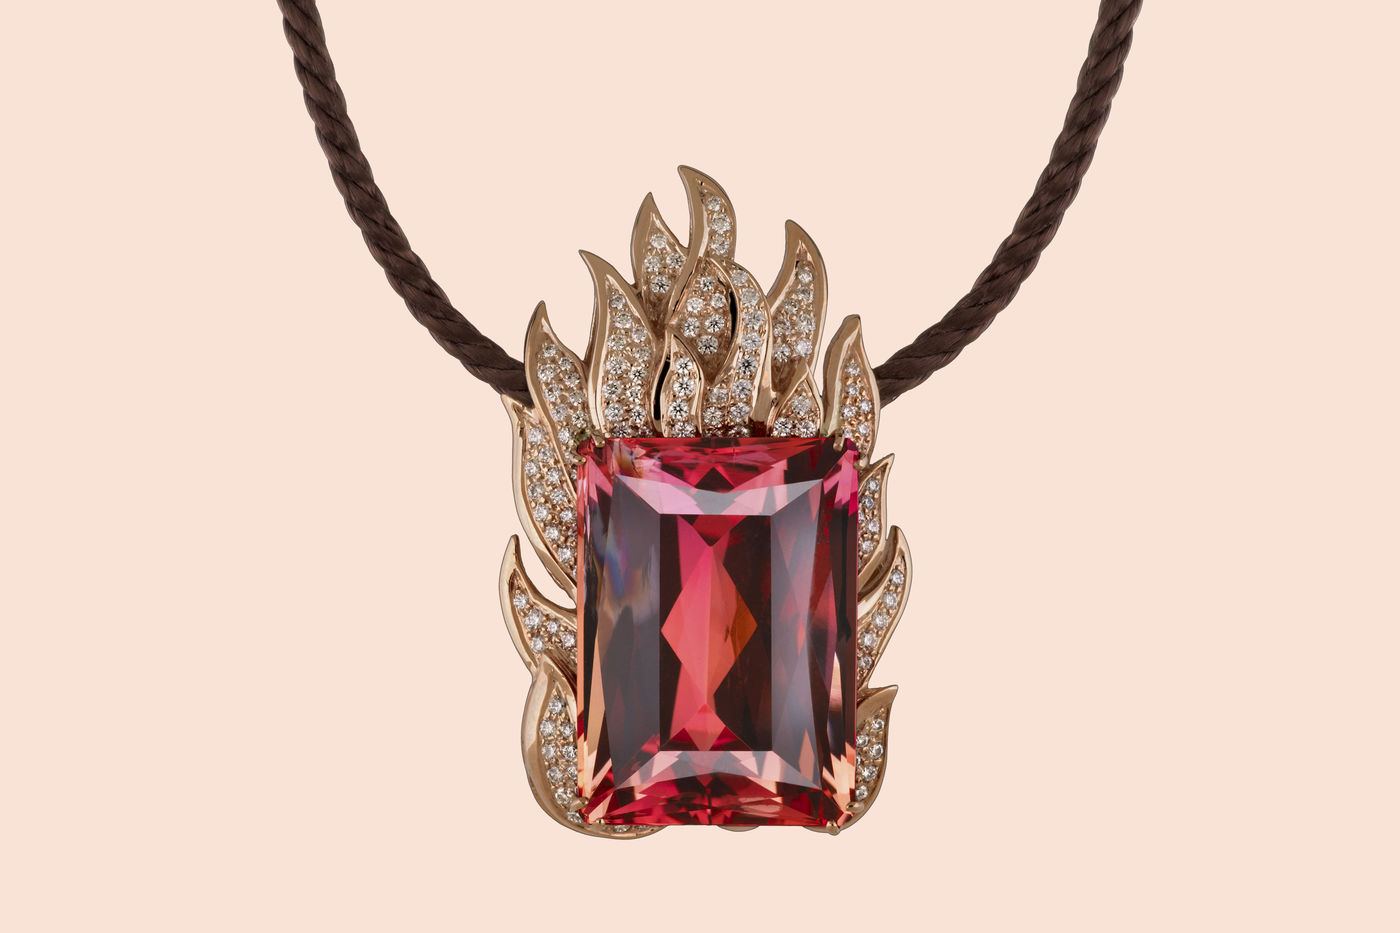 Necklace featuring a large, red gem. Flames made from rose gold and inset with diamonds surround the ruby topaz gem. 